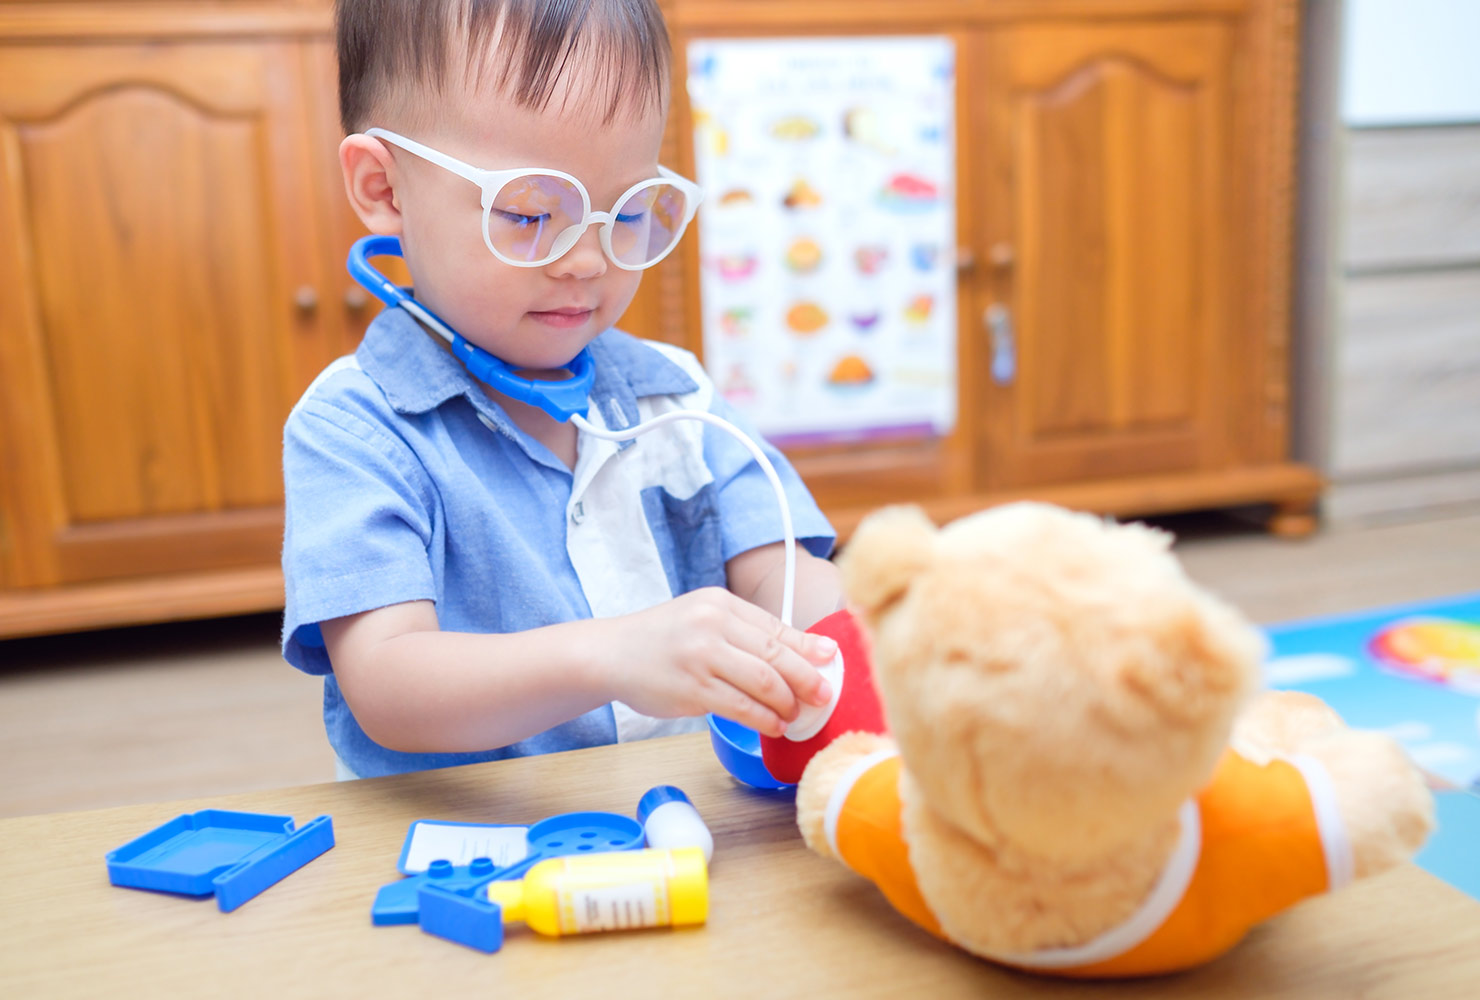 Toddler playing doctor with stuffed bear.